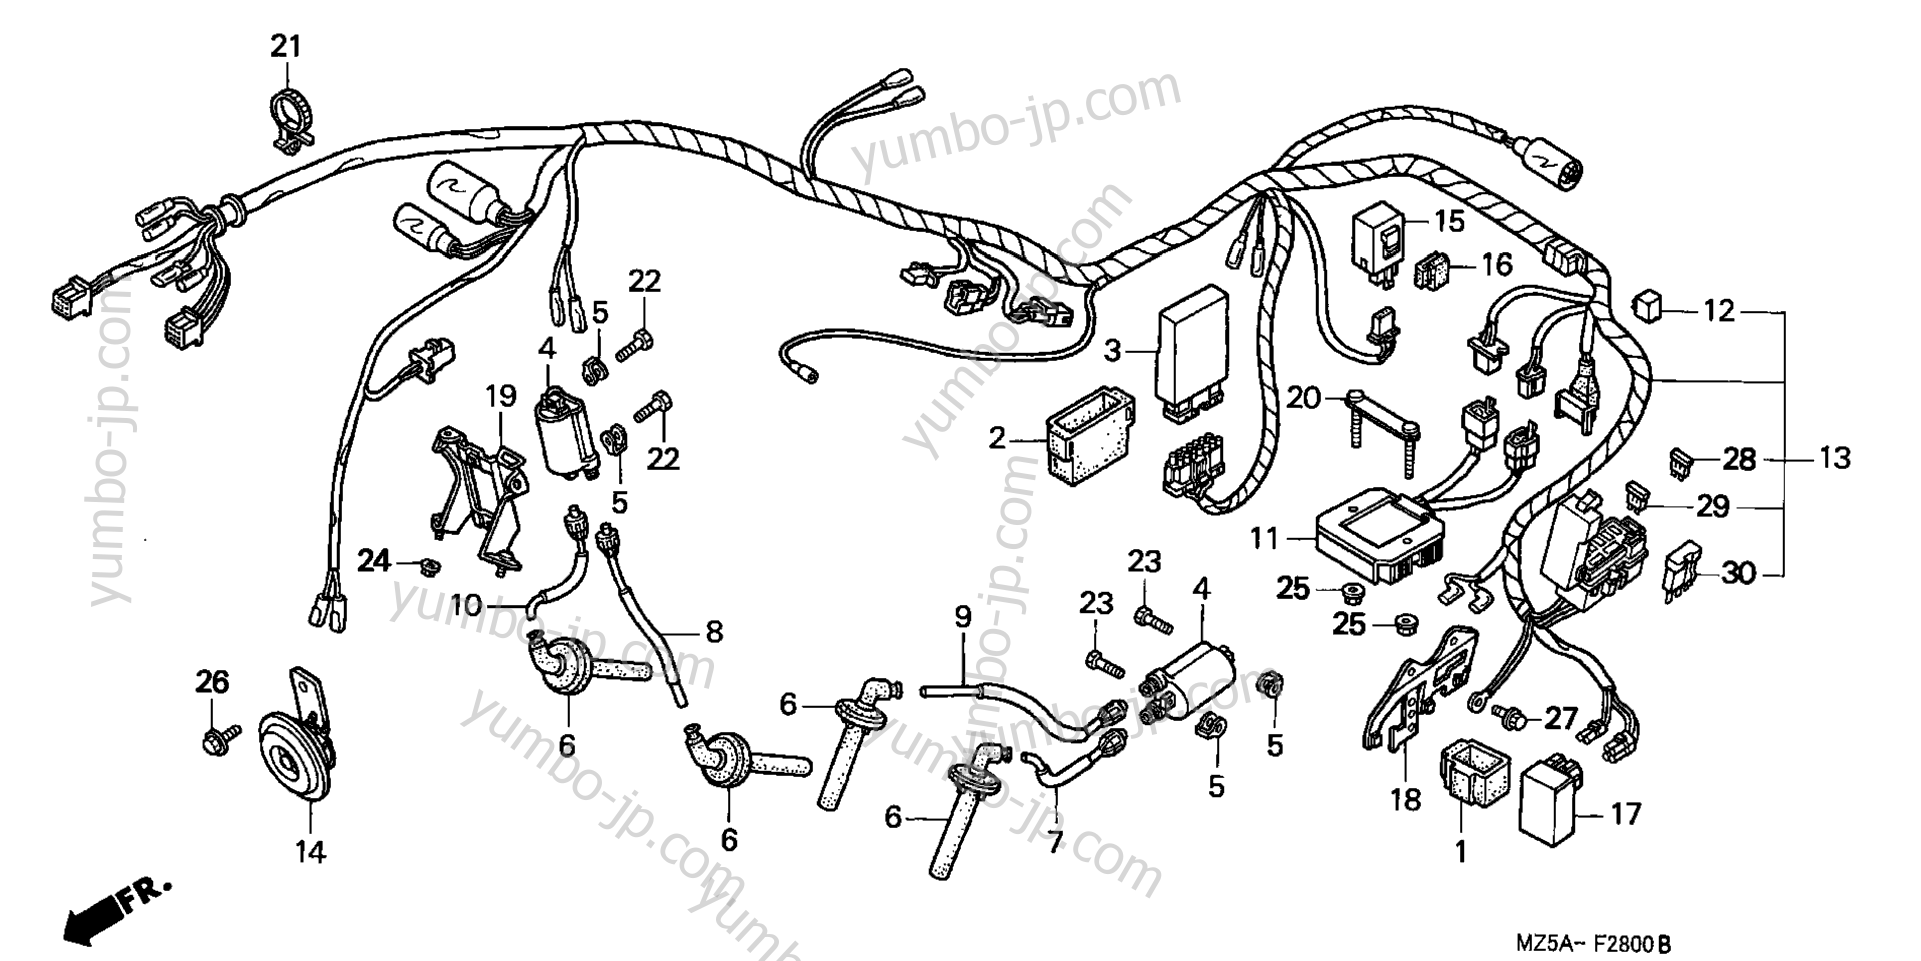 WIRE HARNESS for motorcycles HONDA VF750C2 AC 1998 year